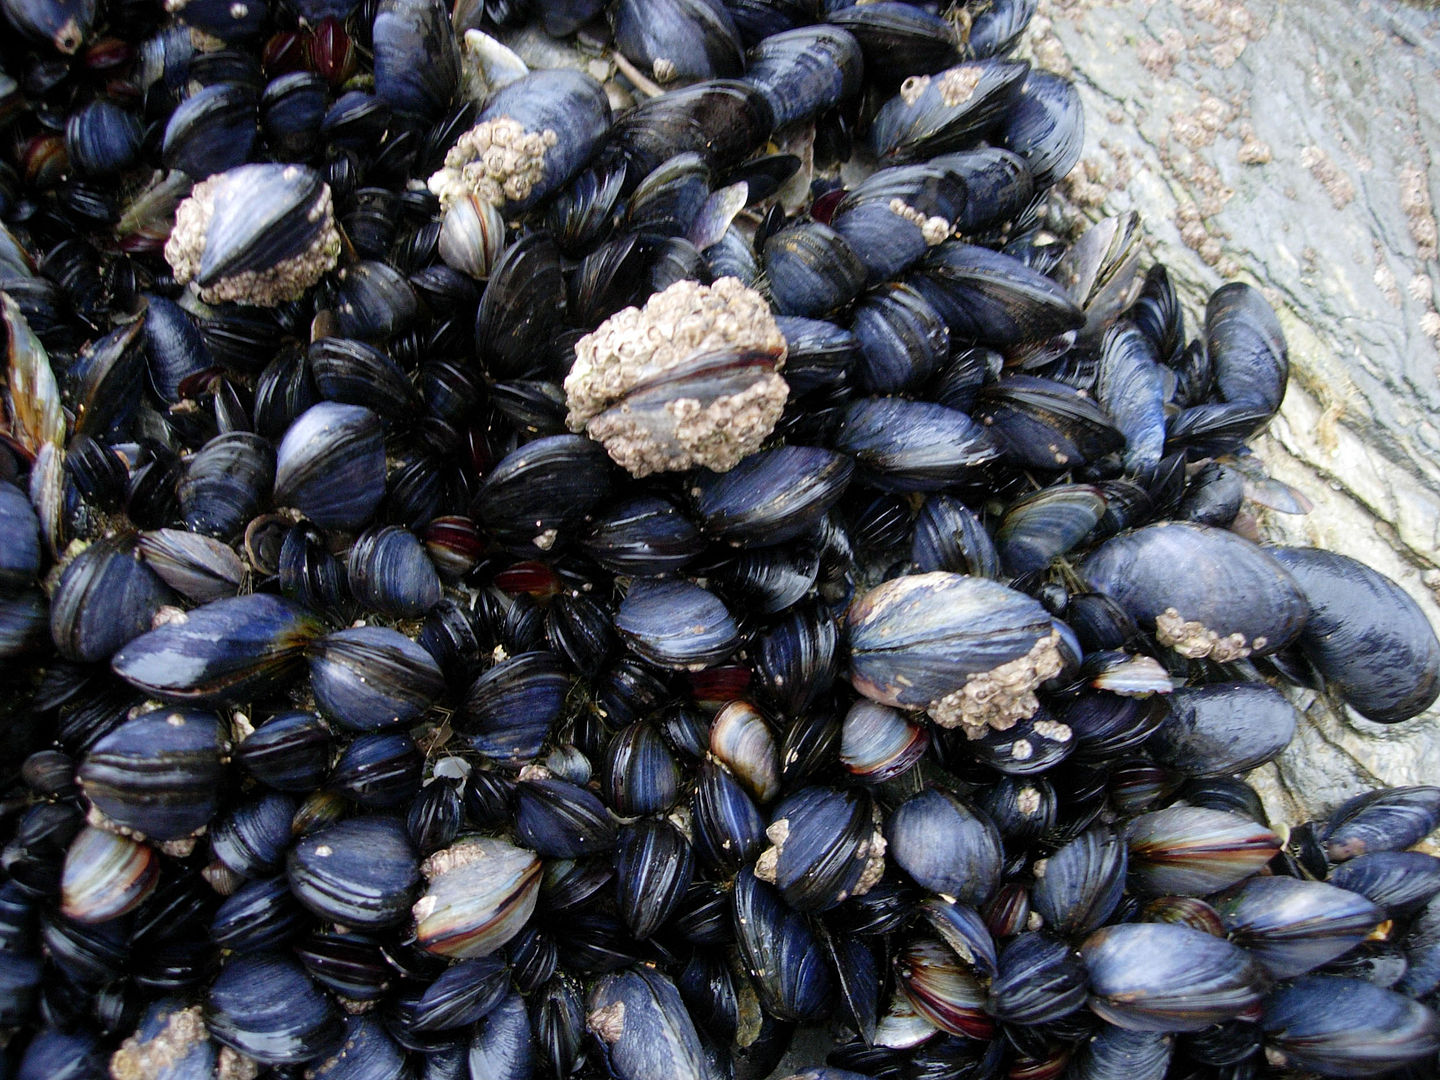 The blue mussel (Mytilus edulis) is an important ecosystem engineer in coastal intertidal and subtidal ecosystems. Its association with its environment is bi-directional; Its presence can strongly alter the type of habitat, influencing the presence of other species. An Eltonian viewpoint is required to quantify their habitat association. Photo credit: Cornish Mussels by Mark A. Wilson – Public Domain.